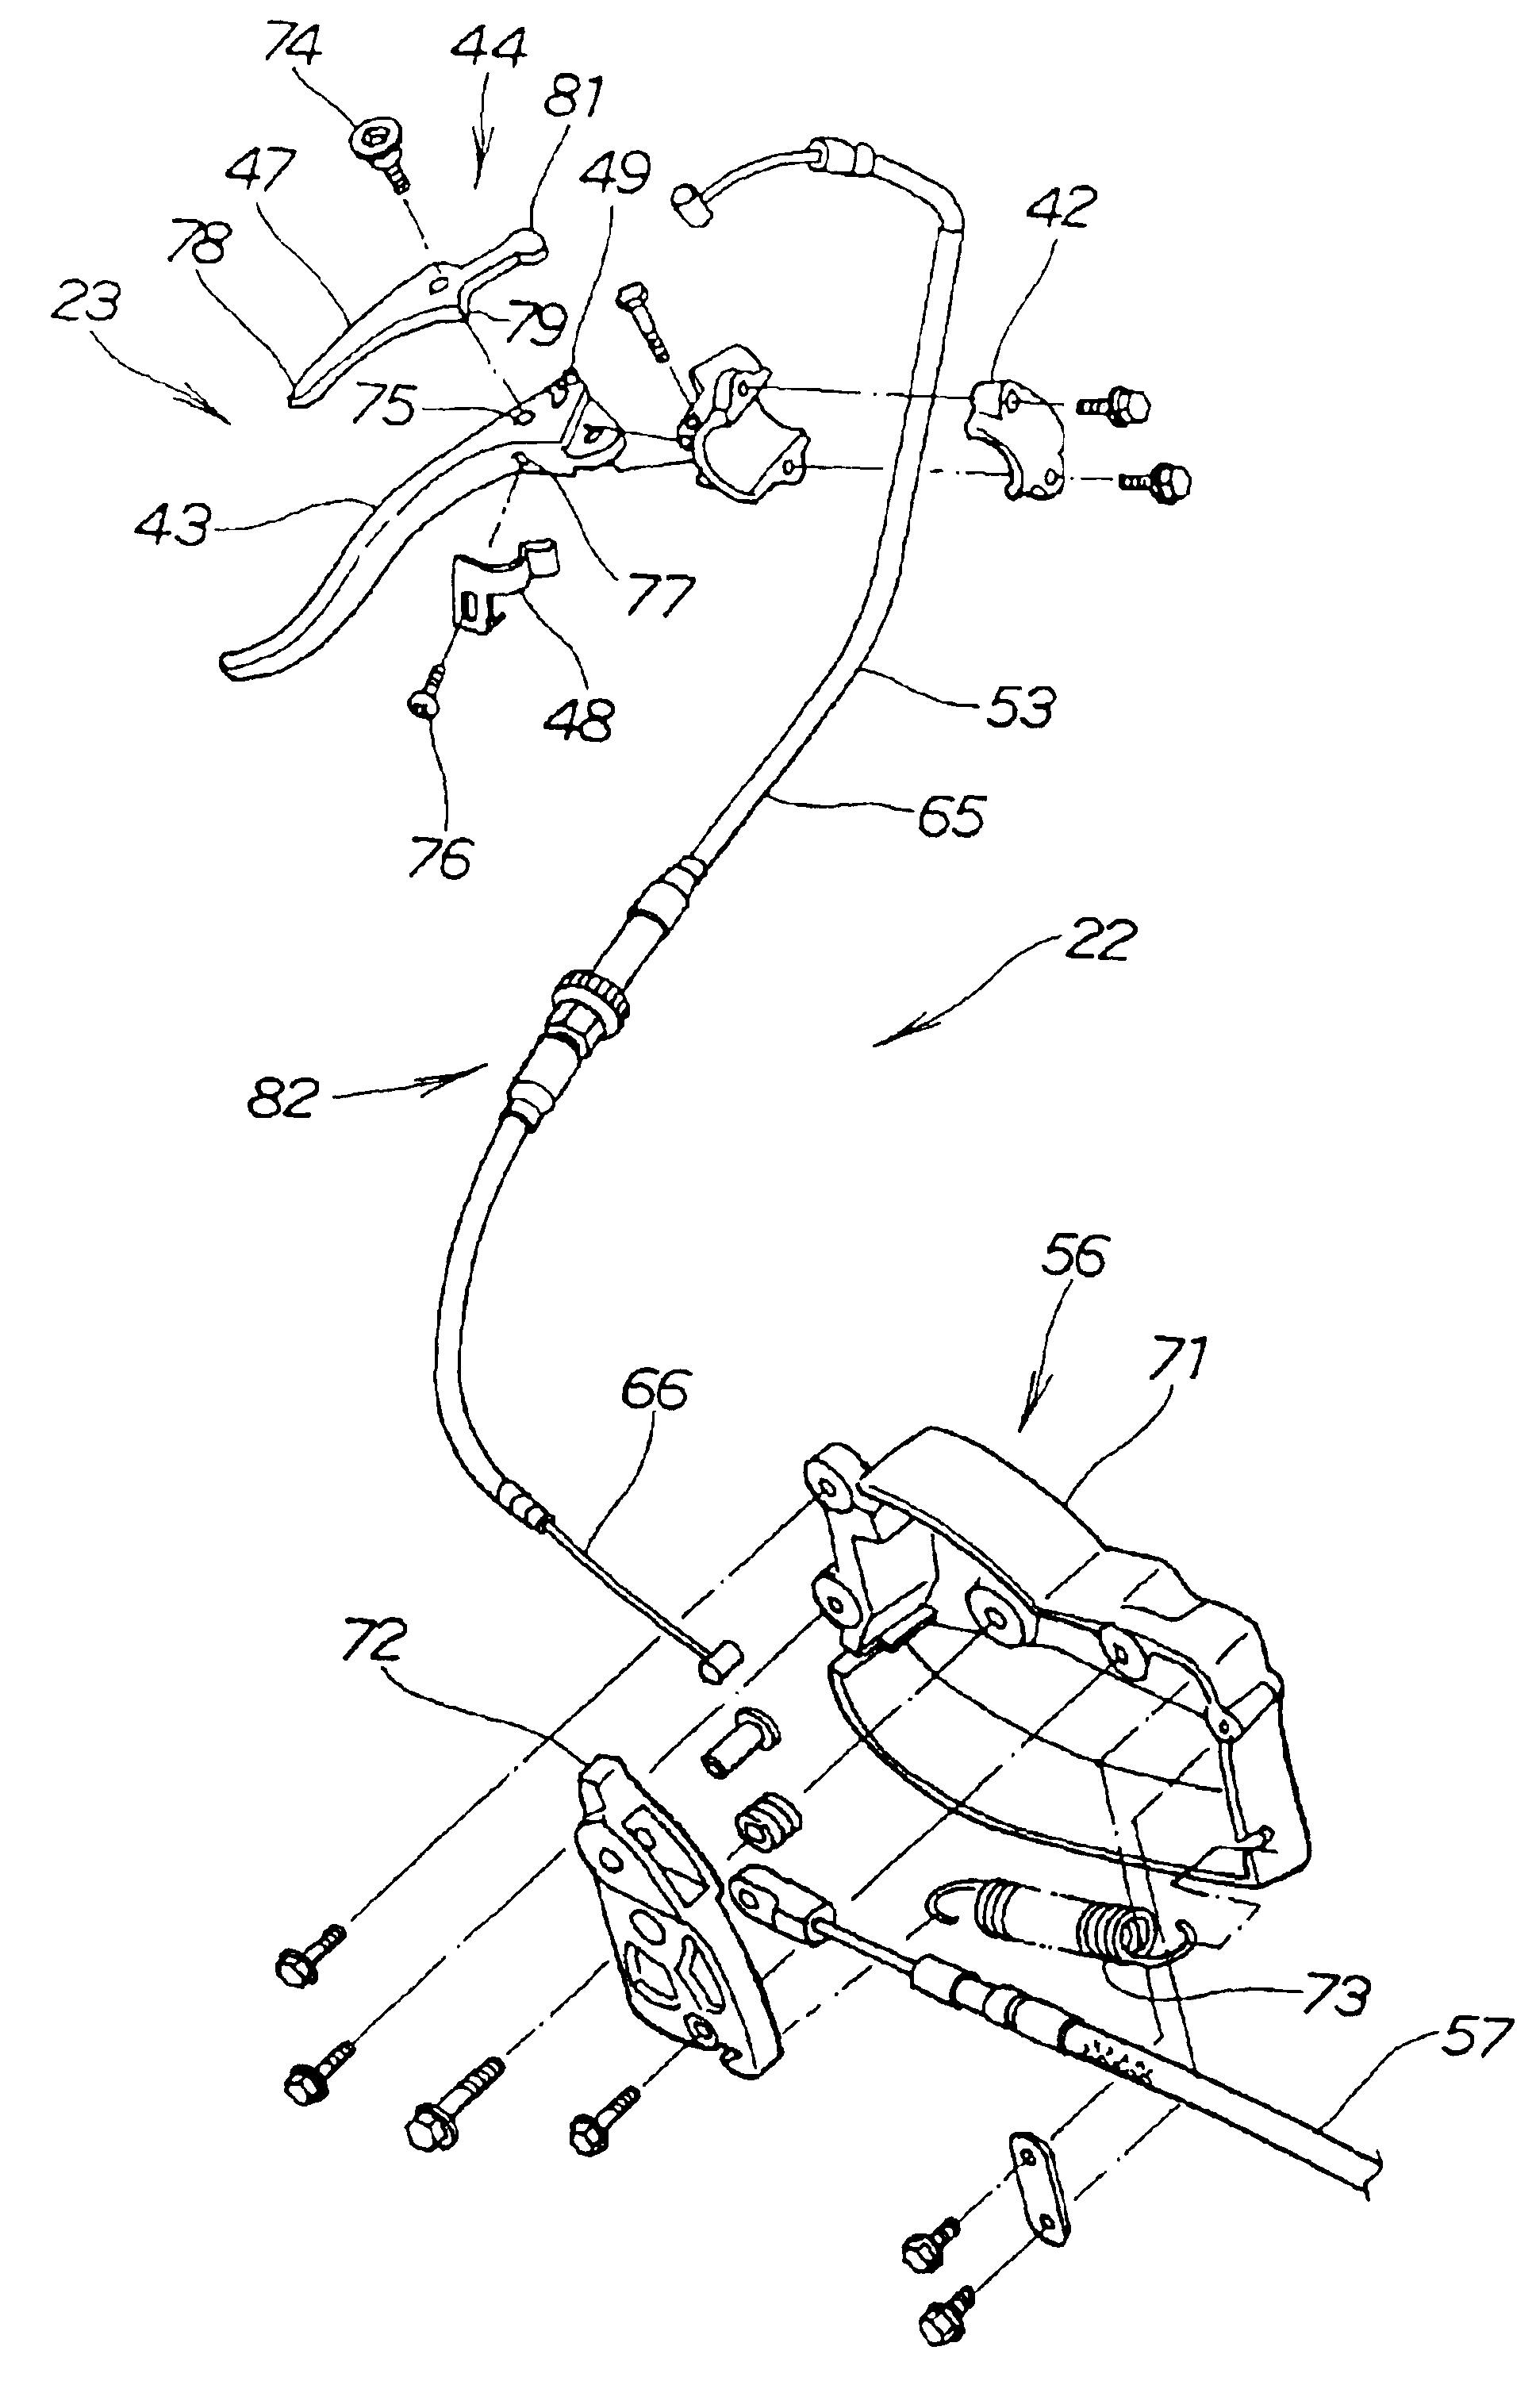 Trim operating lever device for personal watercraft